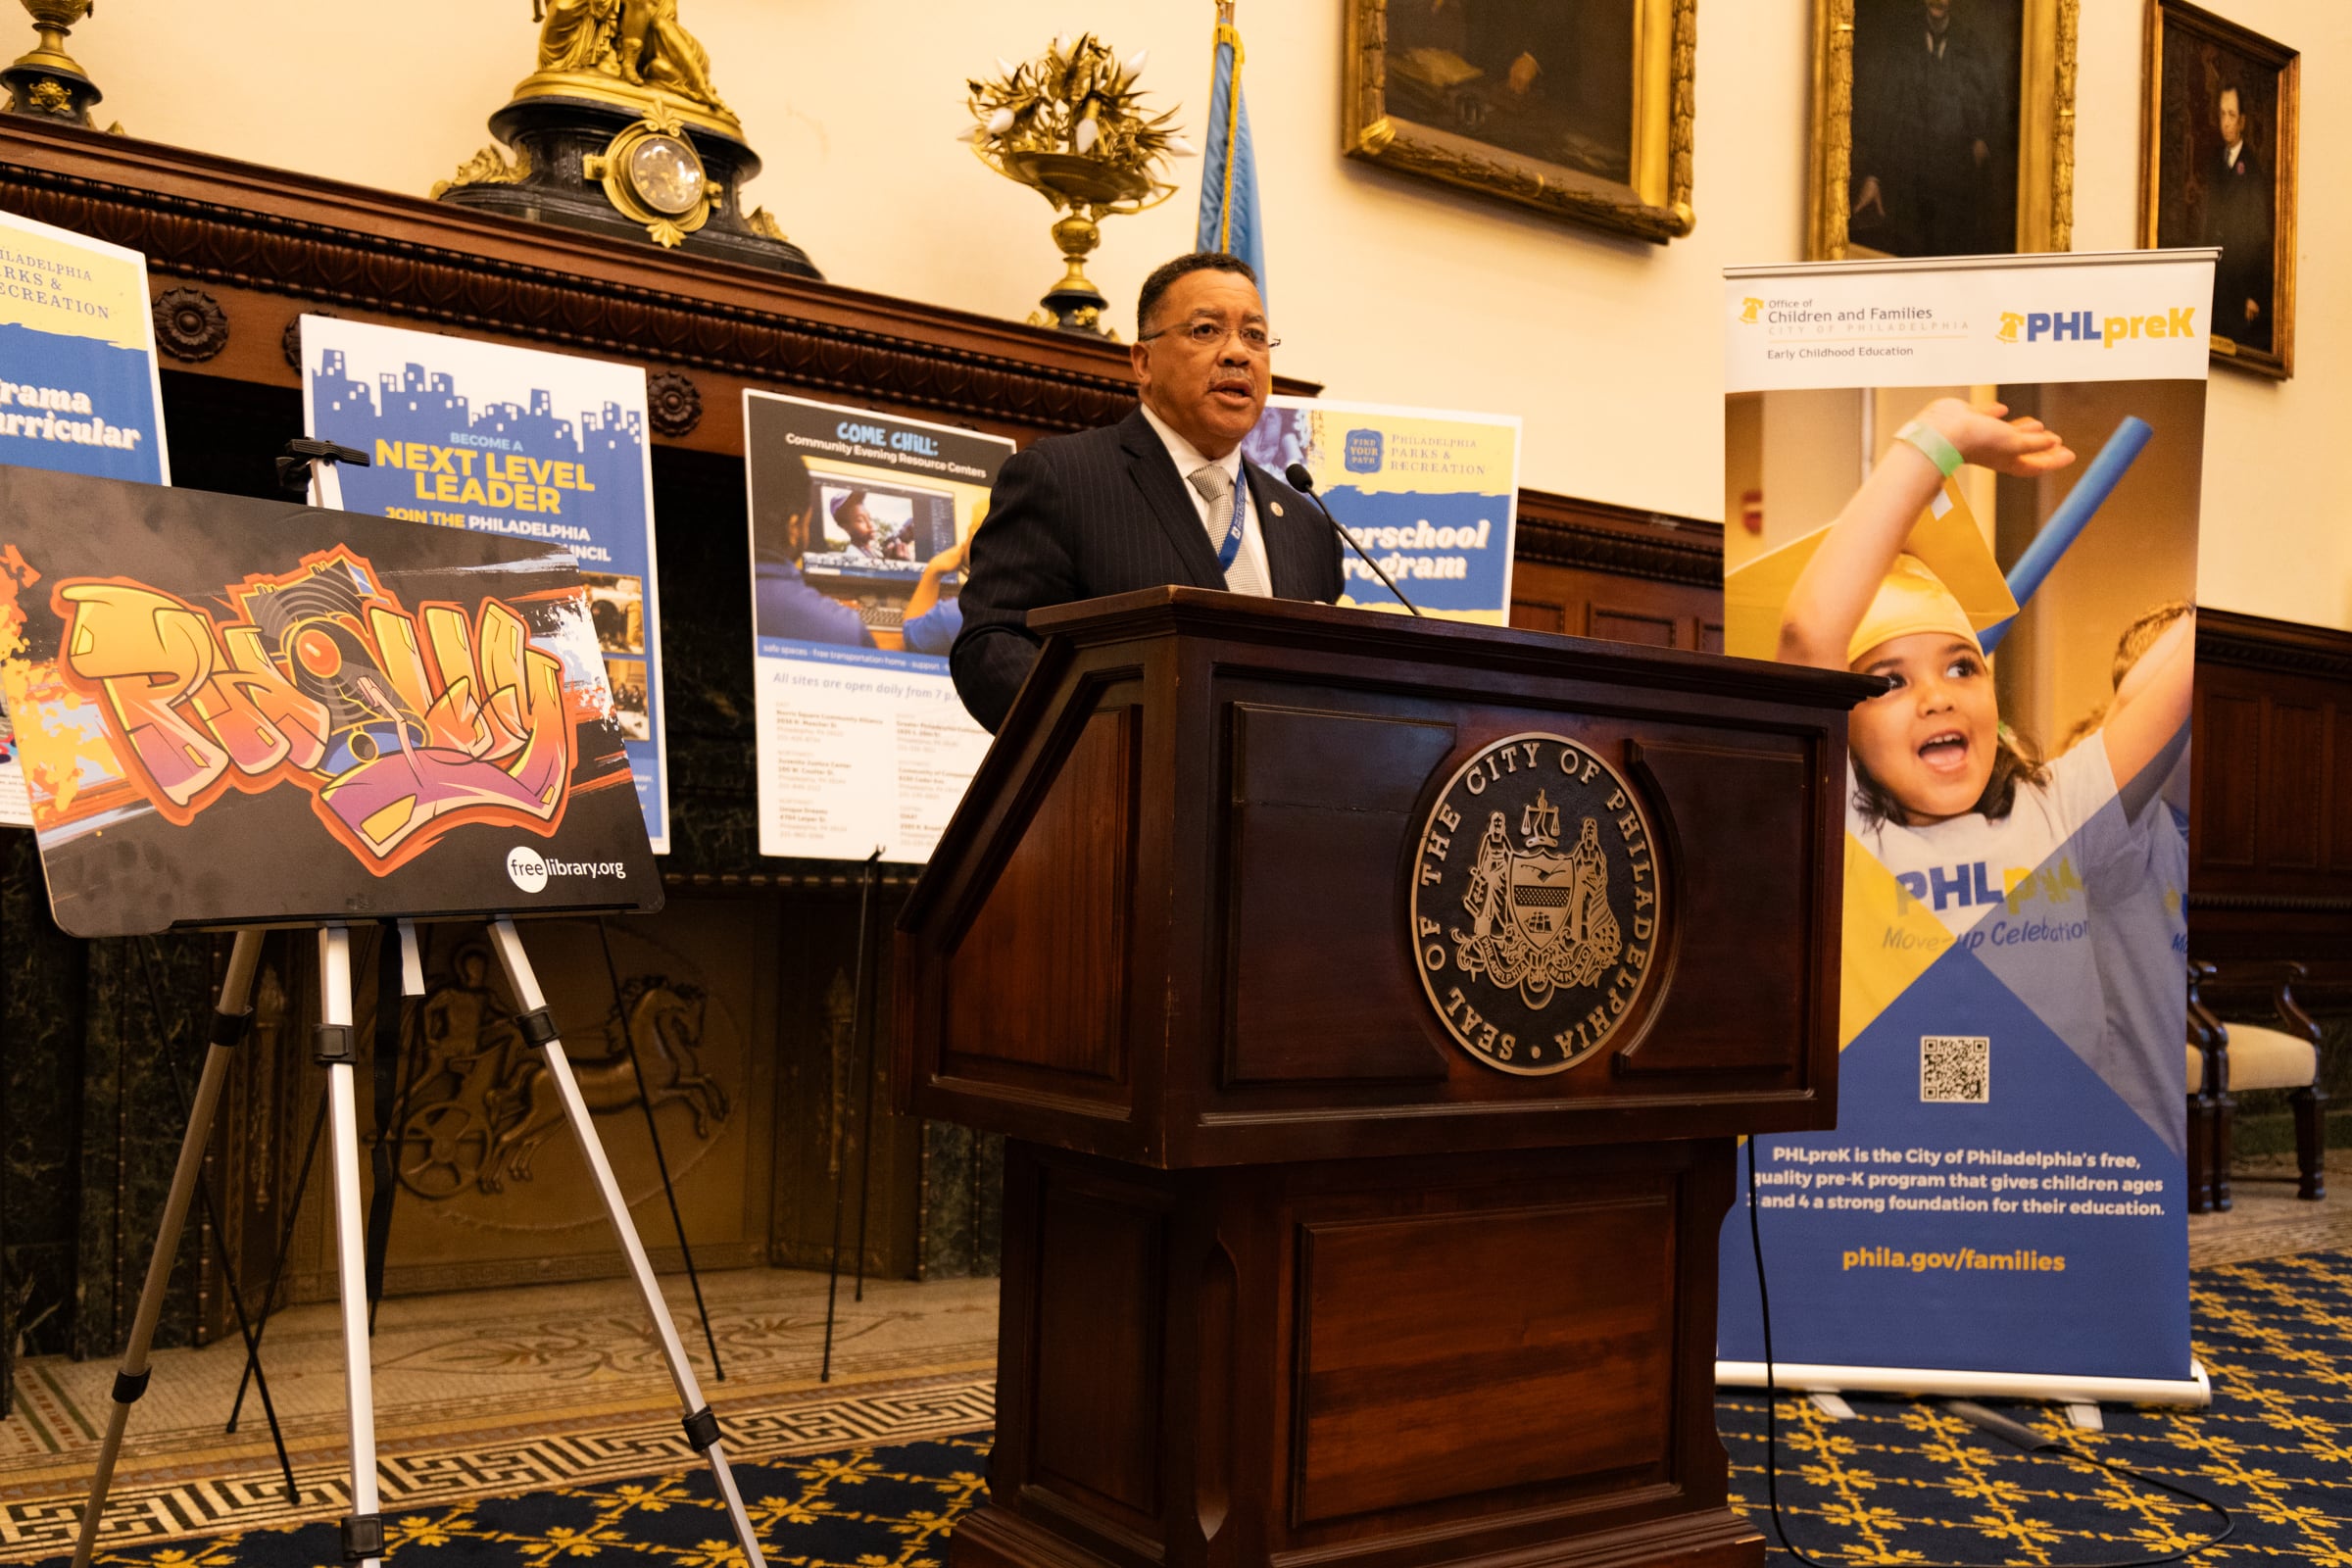 A man in a suit stands at a podium in front of several school safety posters